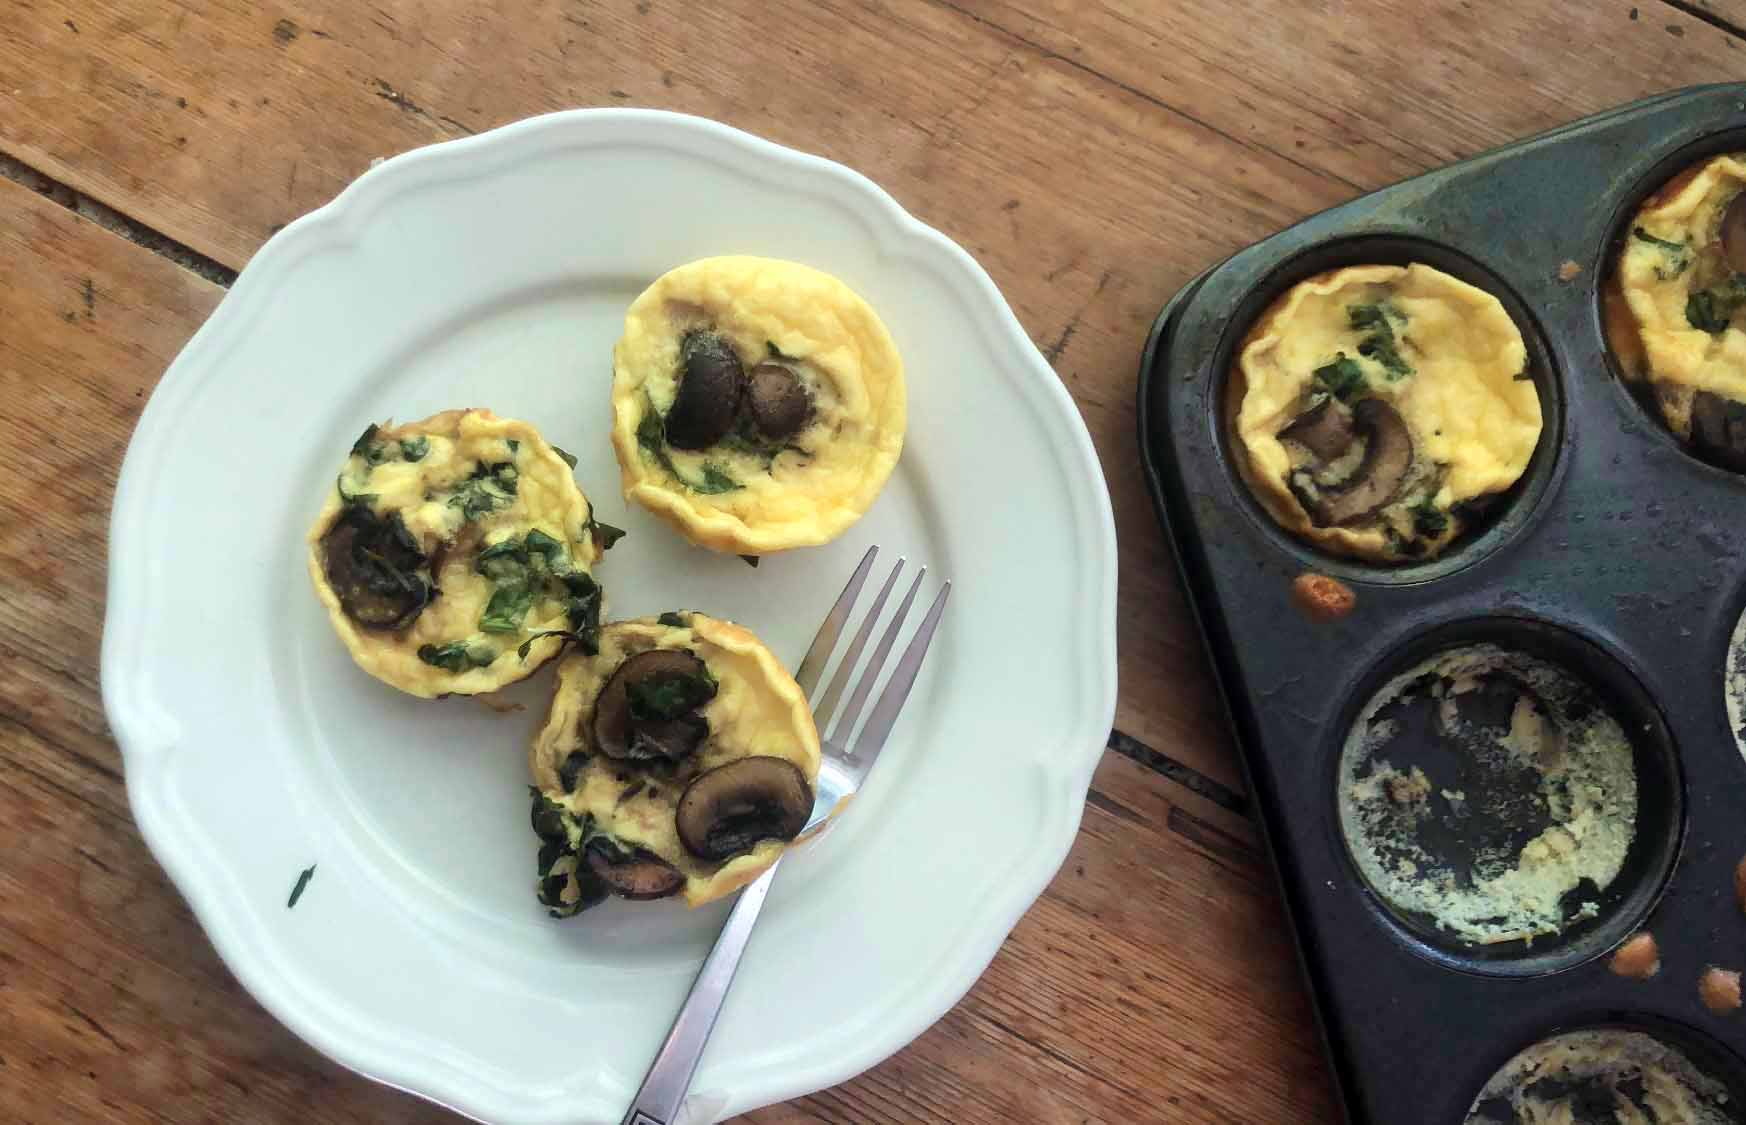 kale and mushroom egg muffins - Dom in the Kitchen